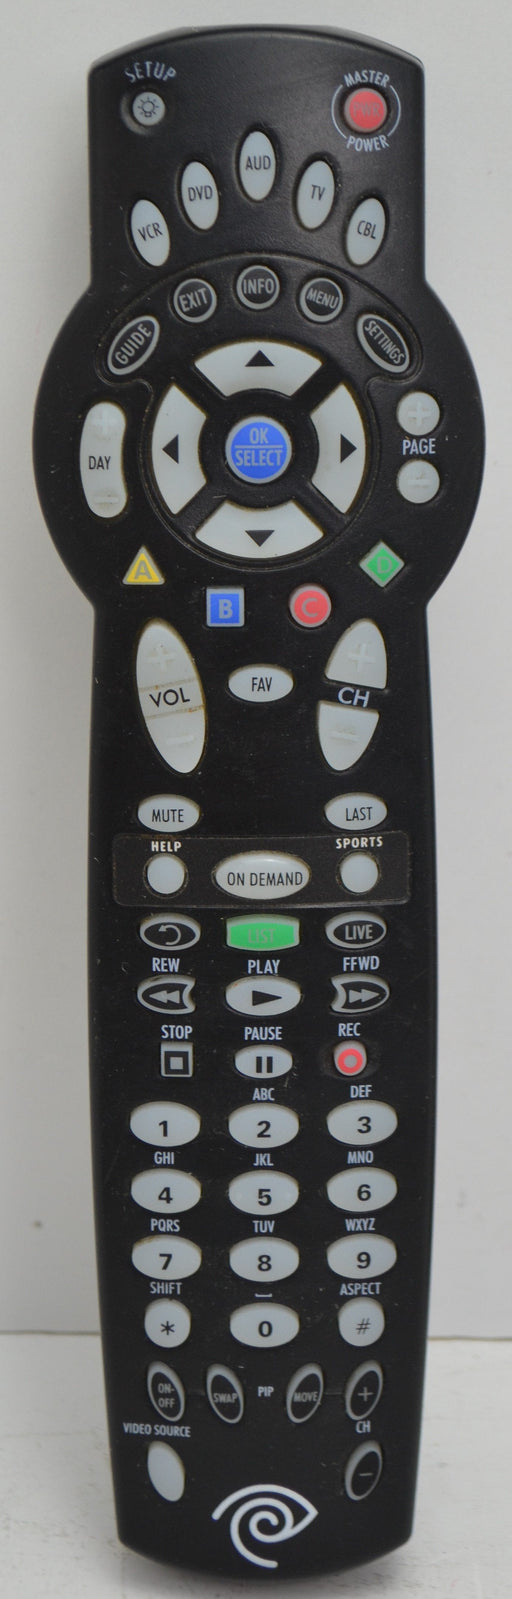 Time Warner Cable - 1056BC3 - Audio Video Cable TV - Remote Control-Remote-SpenCertified-refurbished-vintage-electonics